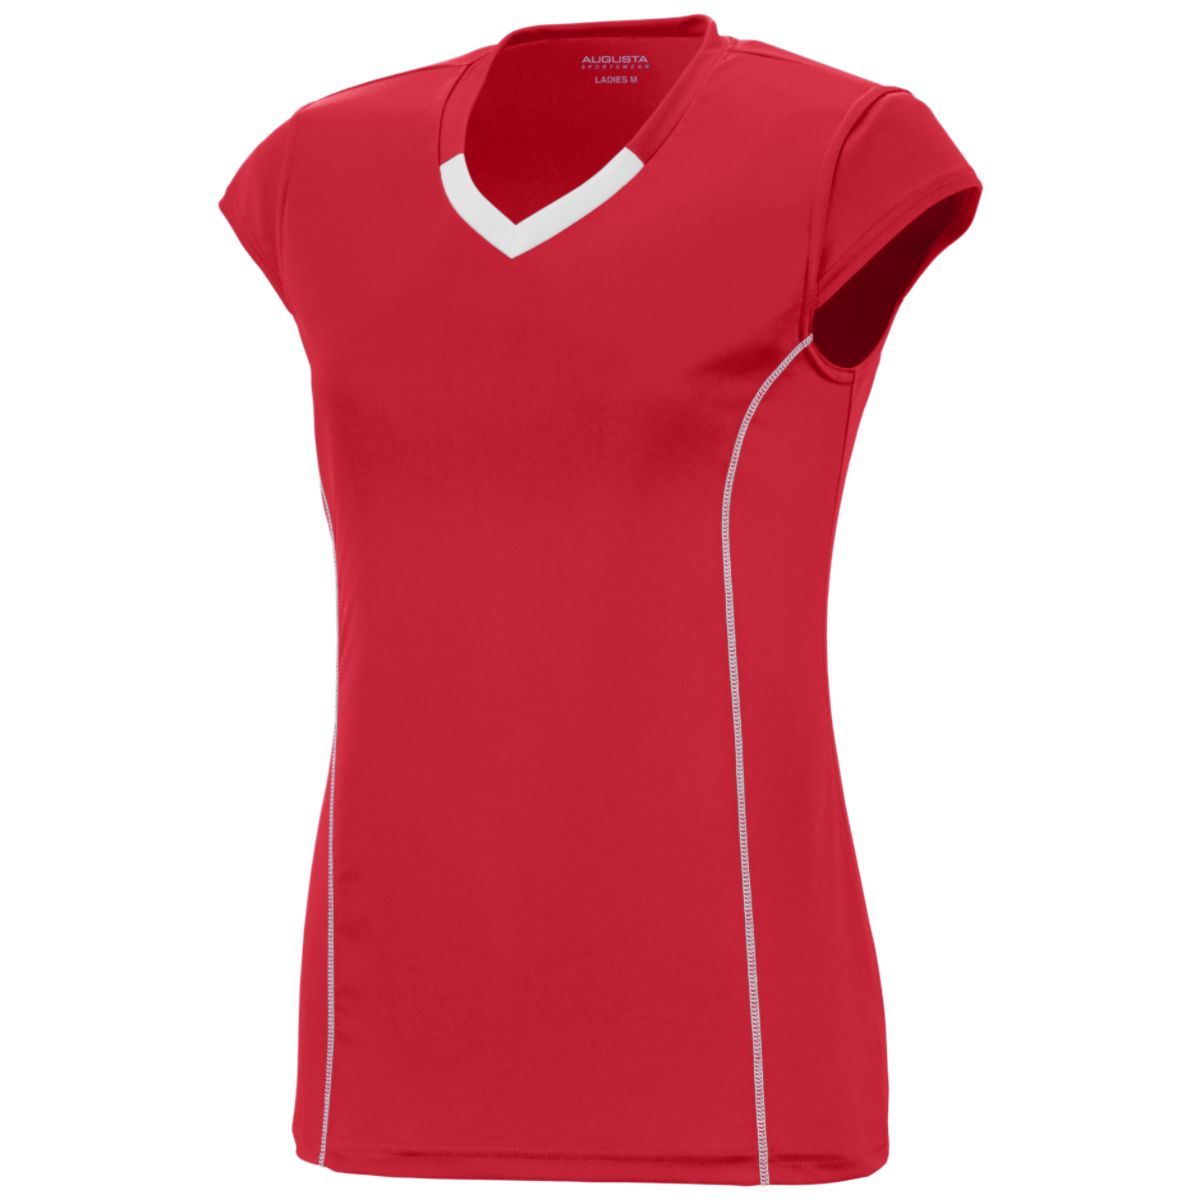 Augusta Sportswear Girls Blash Jersey in Red/White  -Part of the Girls, Augusta-Products, Volleyball, Girls-Jersey, Shirts product lines at KanaleyCreations.com